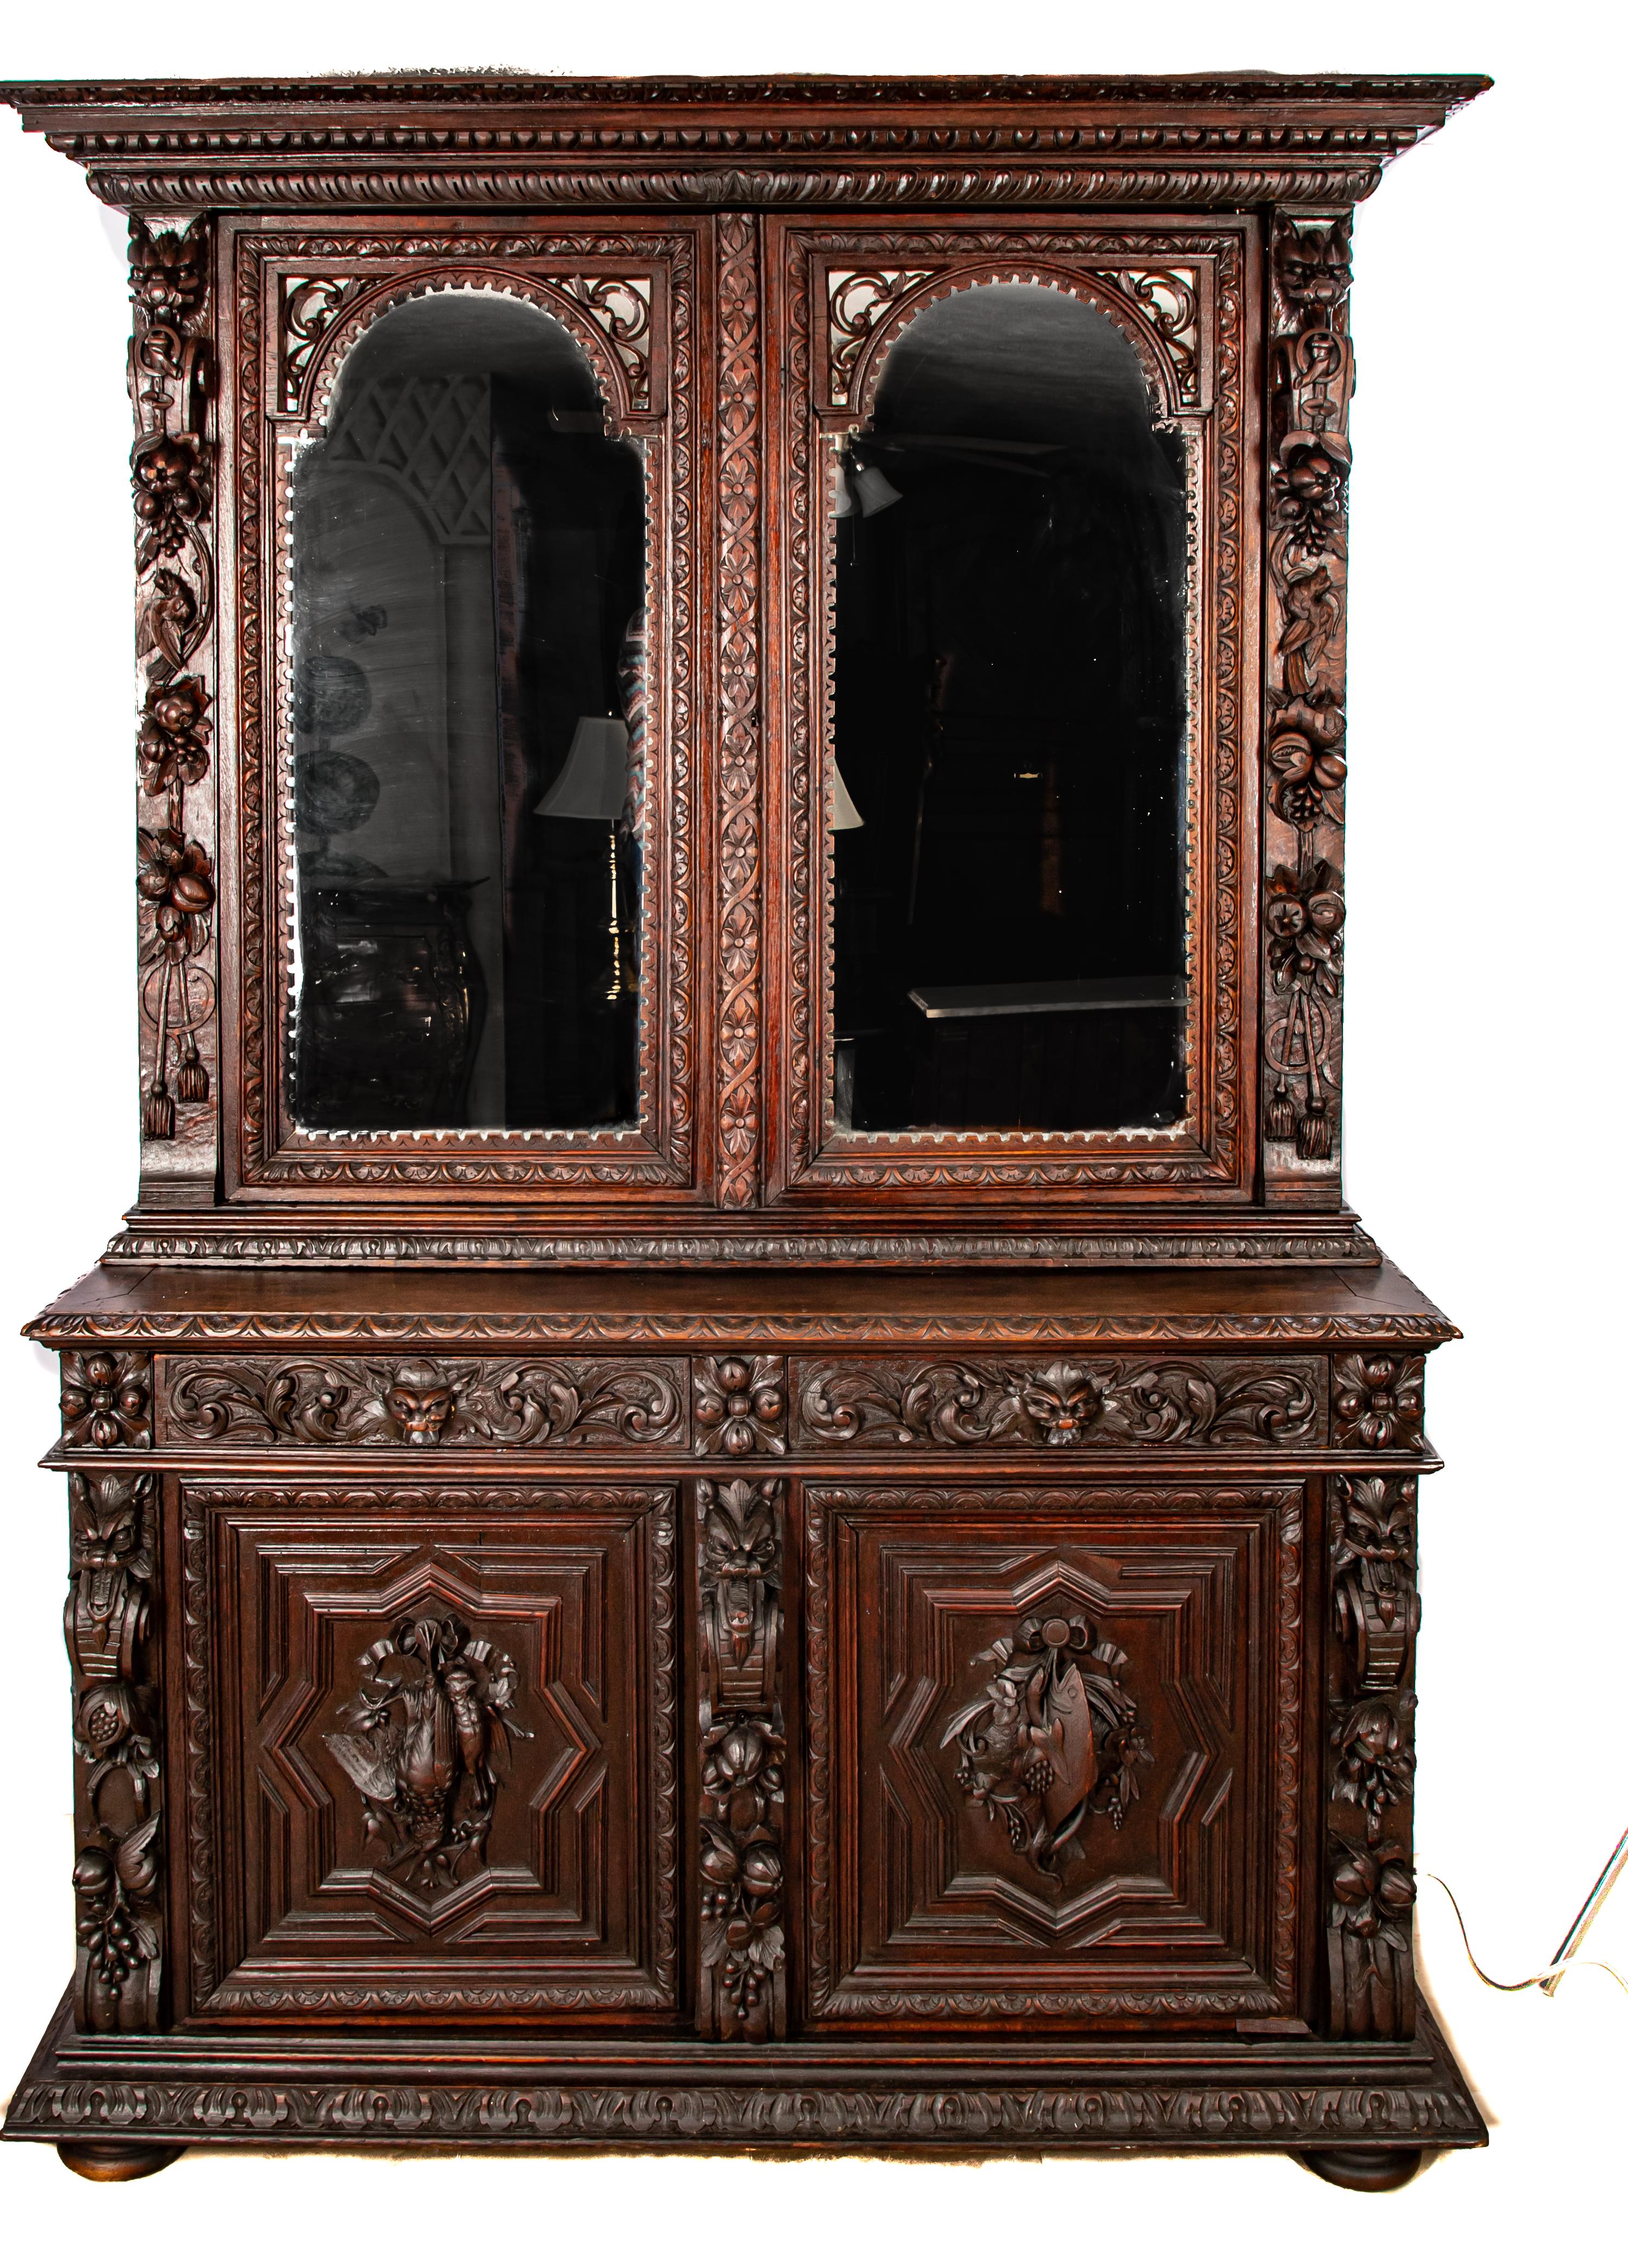 Offering this magnificent French Victorian cupboard. Starting on a massive base the two doors on the bottom have carving. One has a pheasant and the other a fish with fruits and vegetables around them. Rising from there it has two drawers each